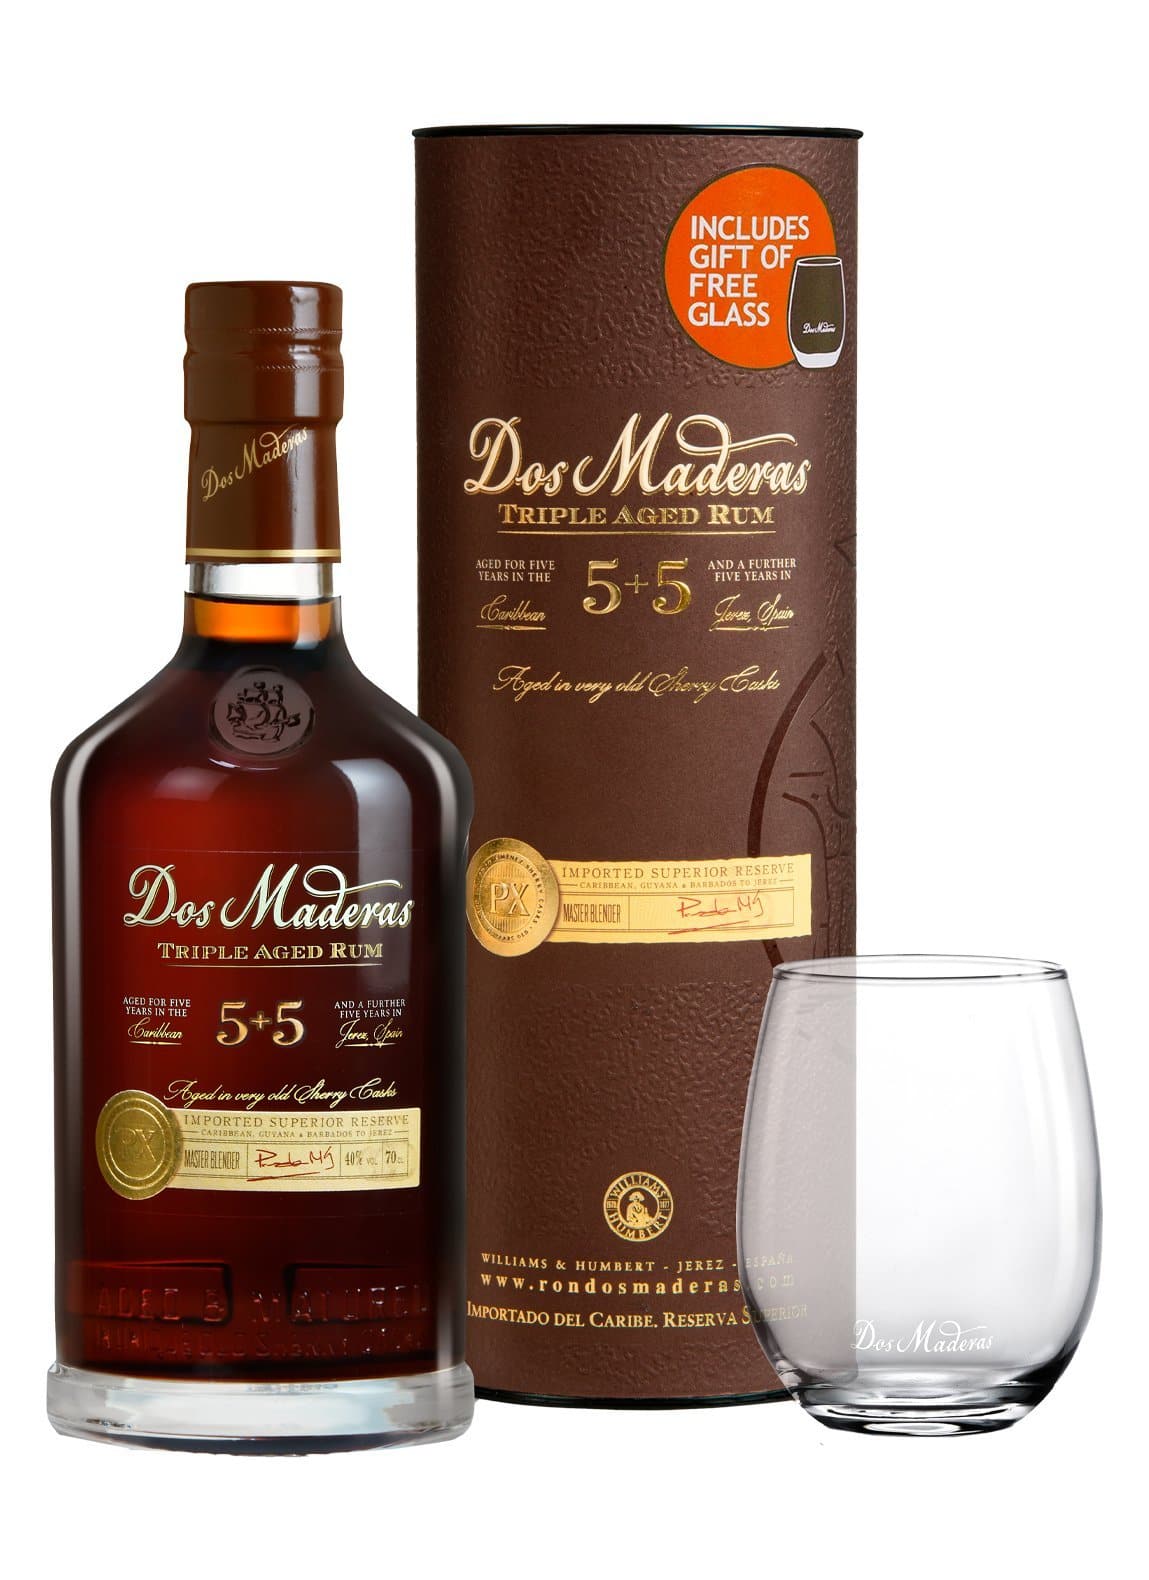 Dos Maderas Rum 5 years+5 years 40% 700ml | Rum | Shop online at Spirits of France